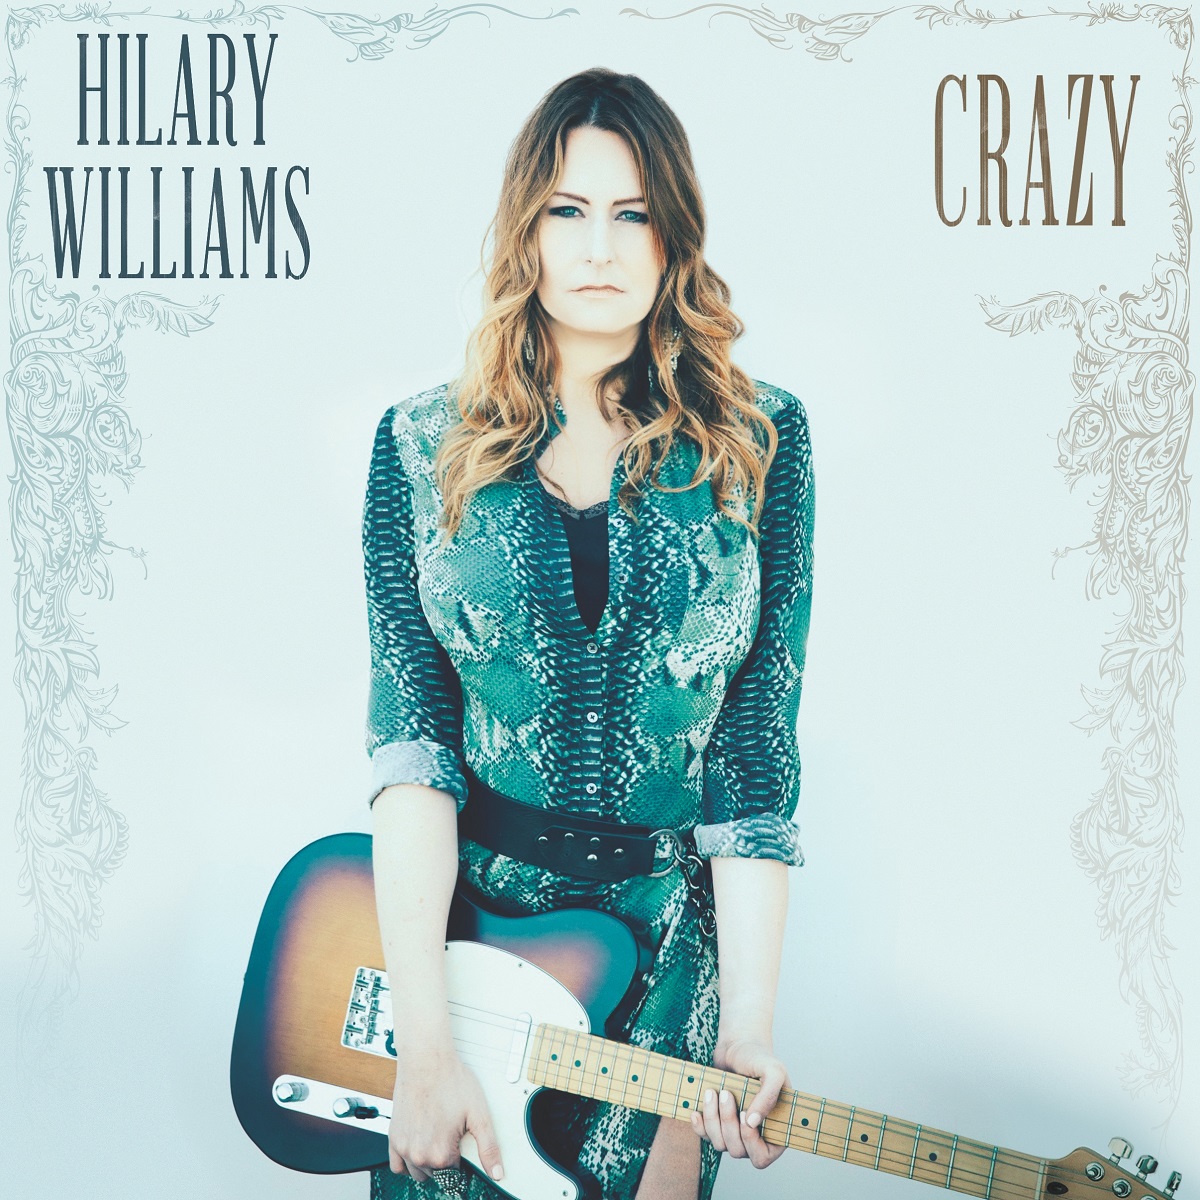 Hilary Williams, Granddaughter of Hank Williams Sr., Releases New Single, ‘Crazy’